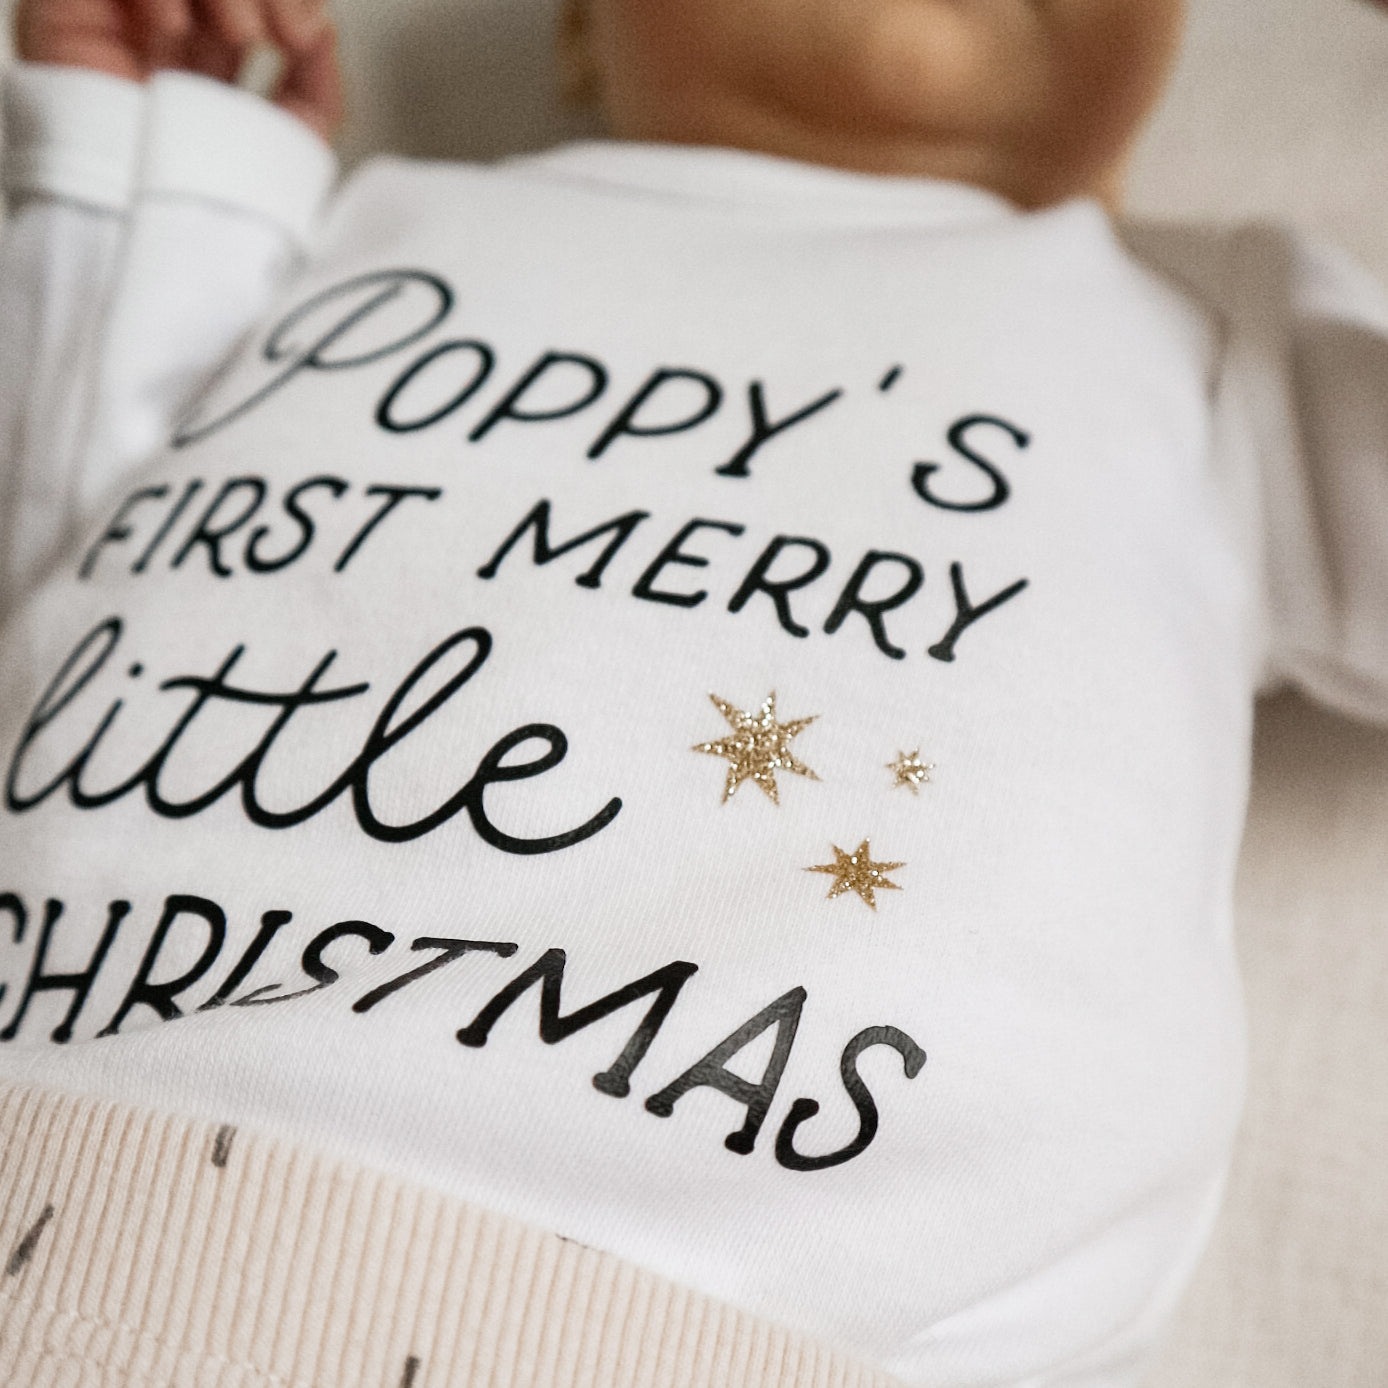 *SALE* Personalised baby's first merry little Christmas outfit - sleepsuit